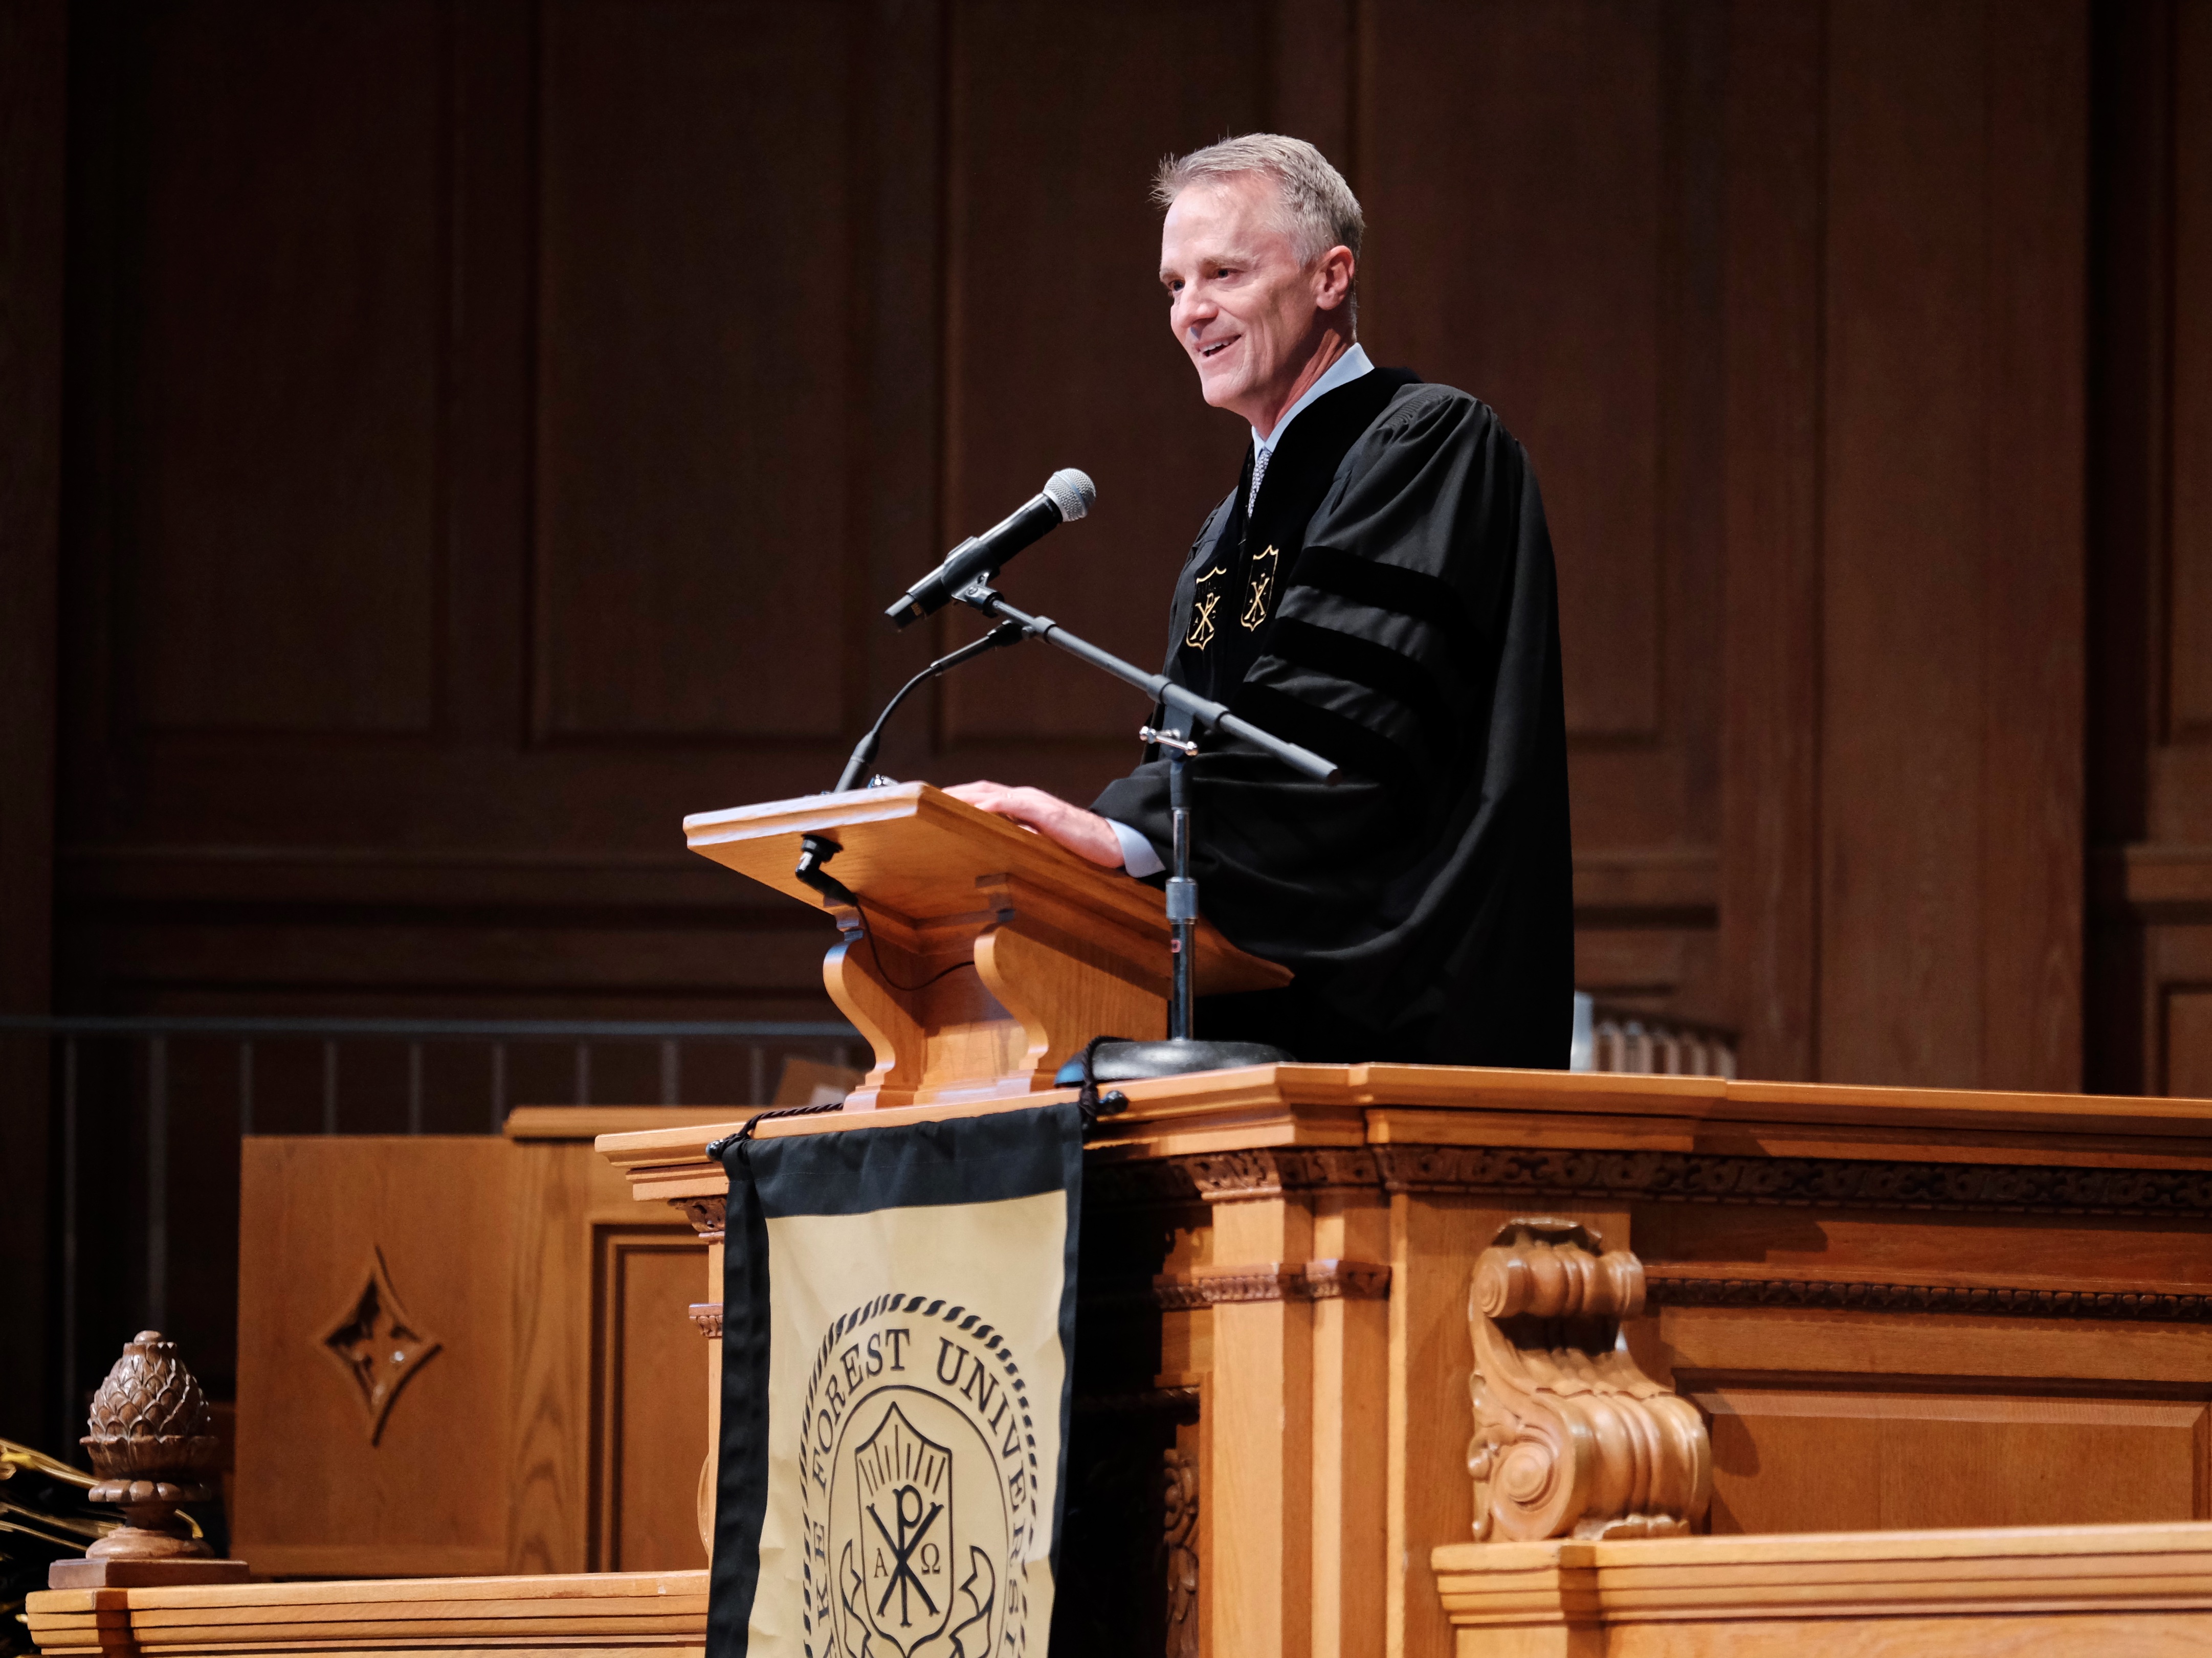 WFU School of Business held their Hooding ceremony in Wait Chapel